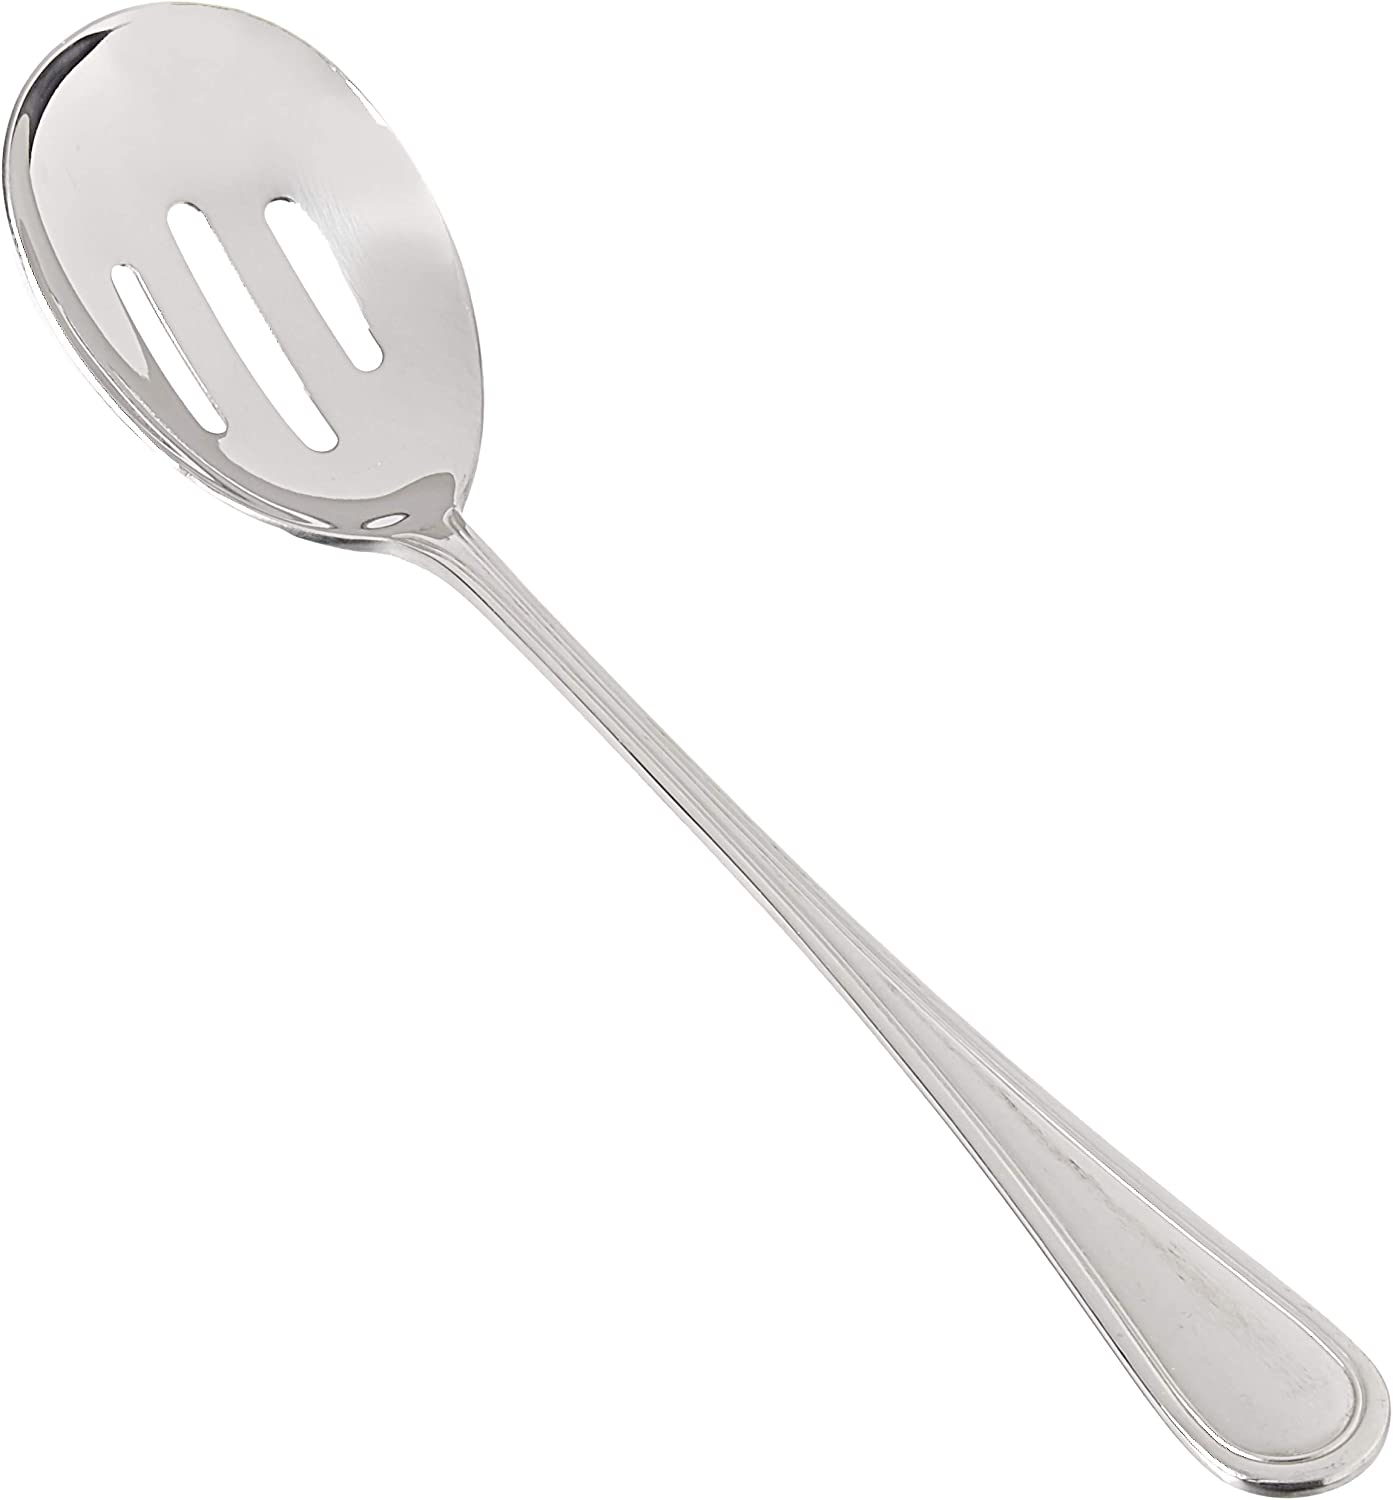 Winco Shangarila 12-Piece Banquet Slotted Serving Spoon Set, 18-8 Stainless Steel